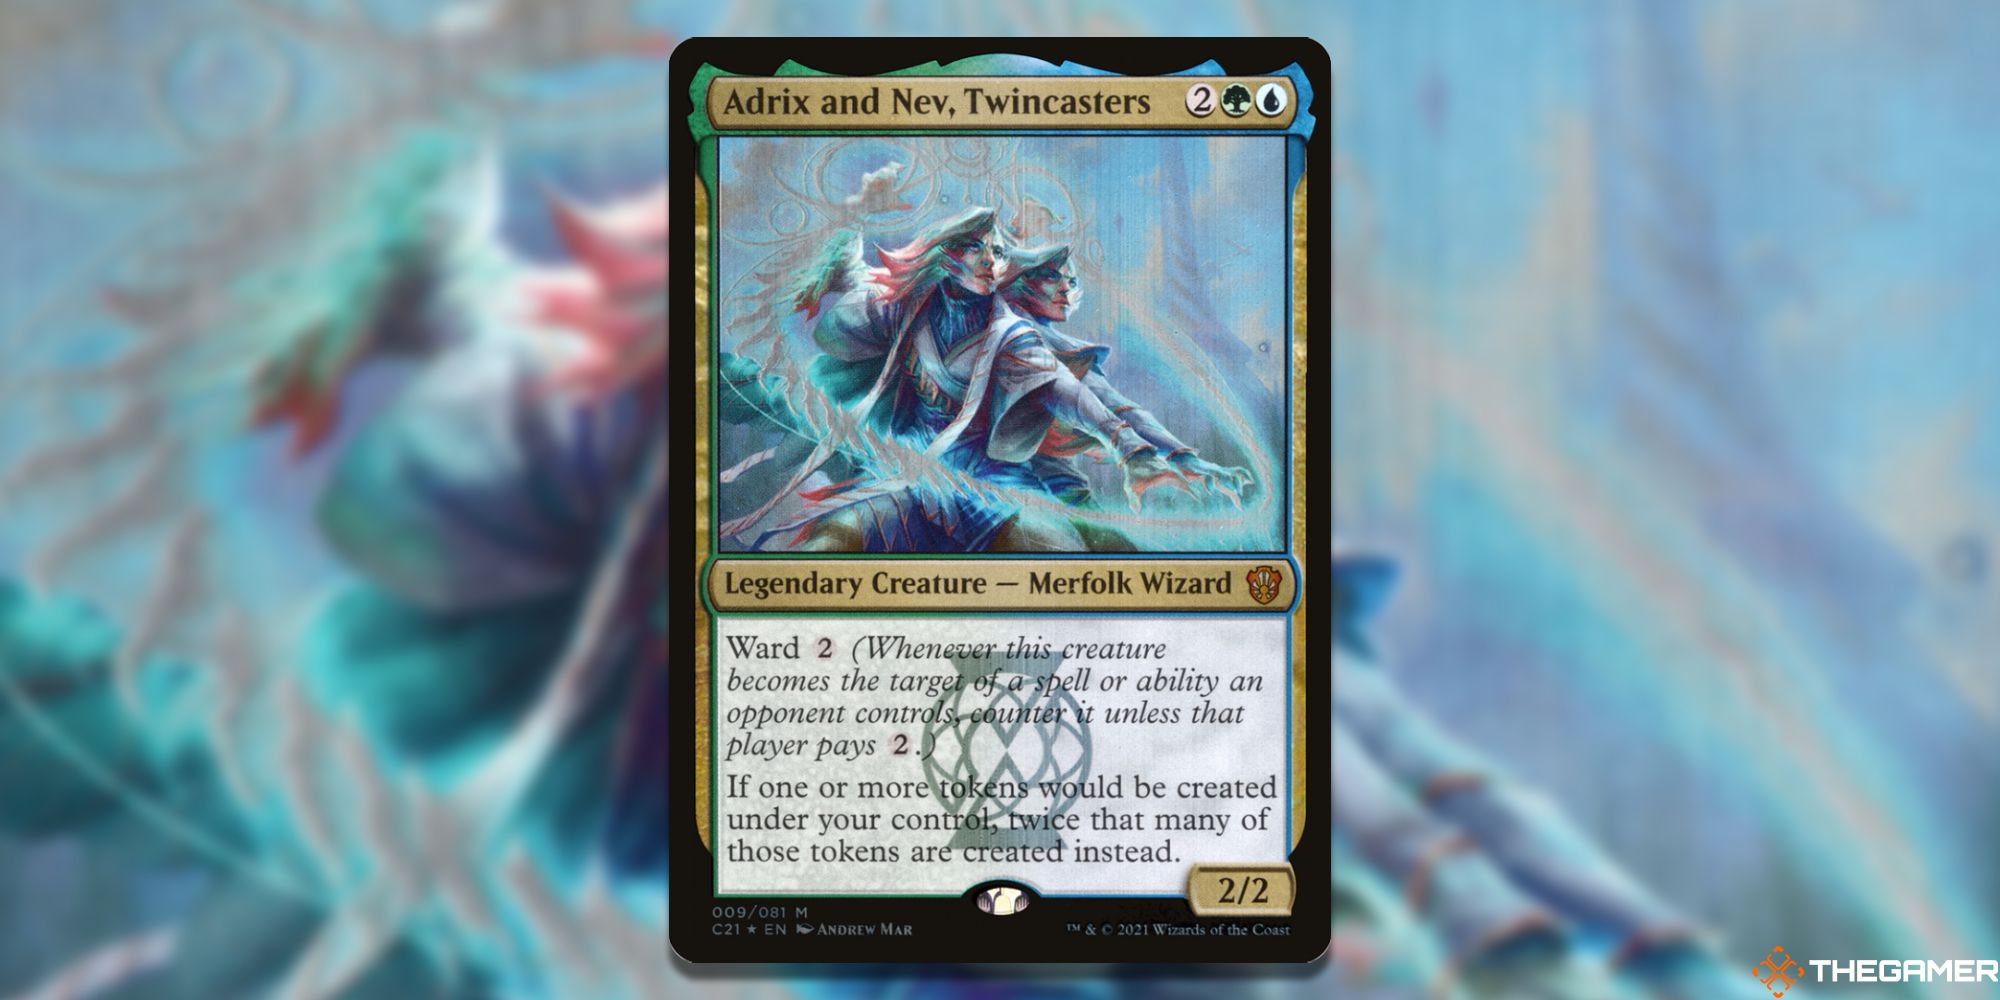 Image of the Adrix and Nev, Twincasters card in Magic: The Gathering, with art by Andrew Mar